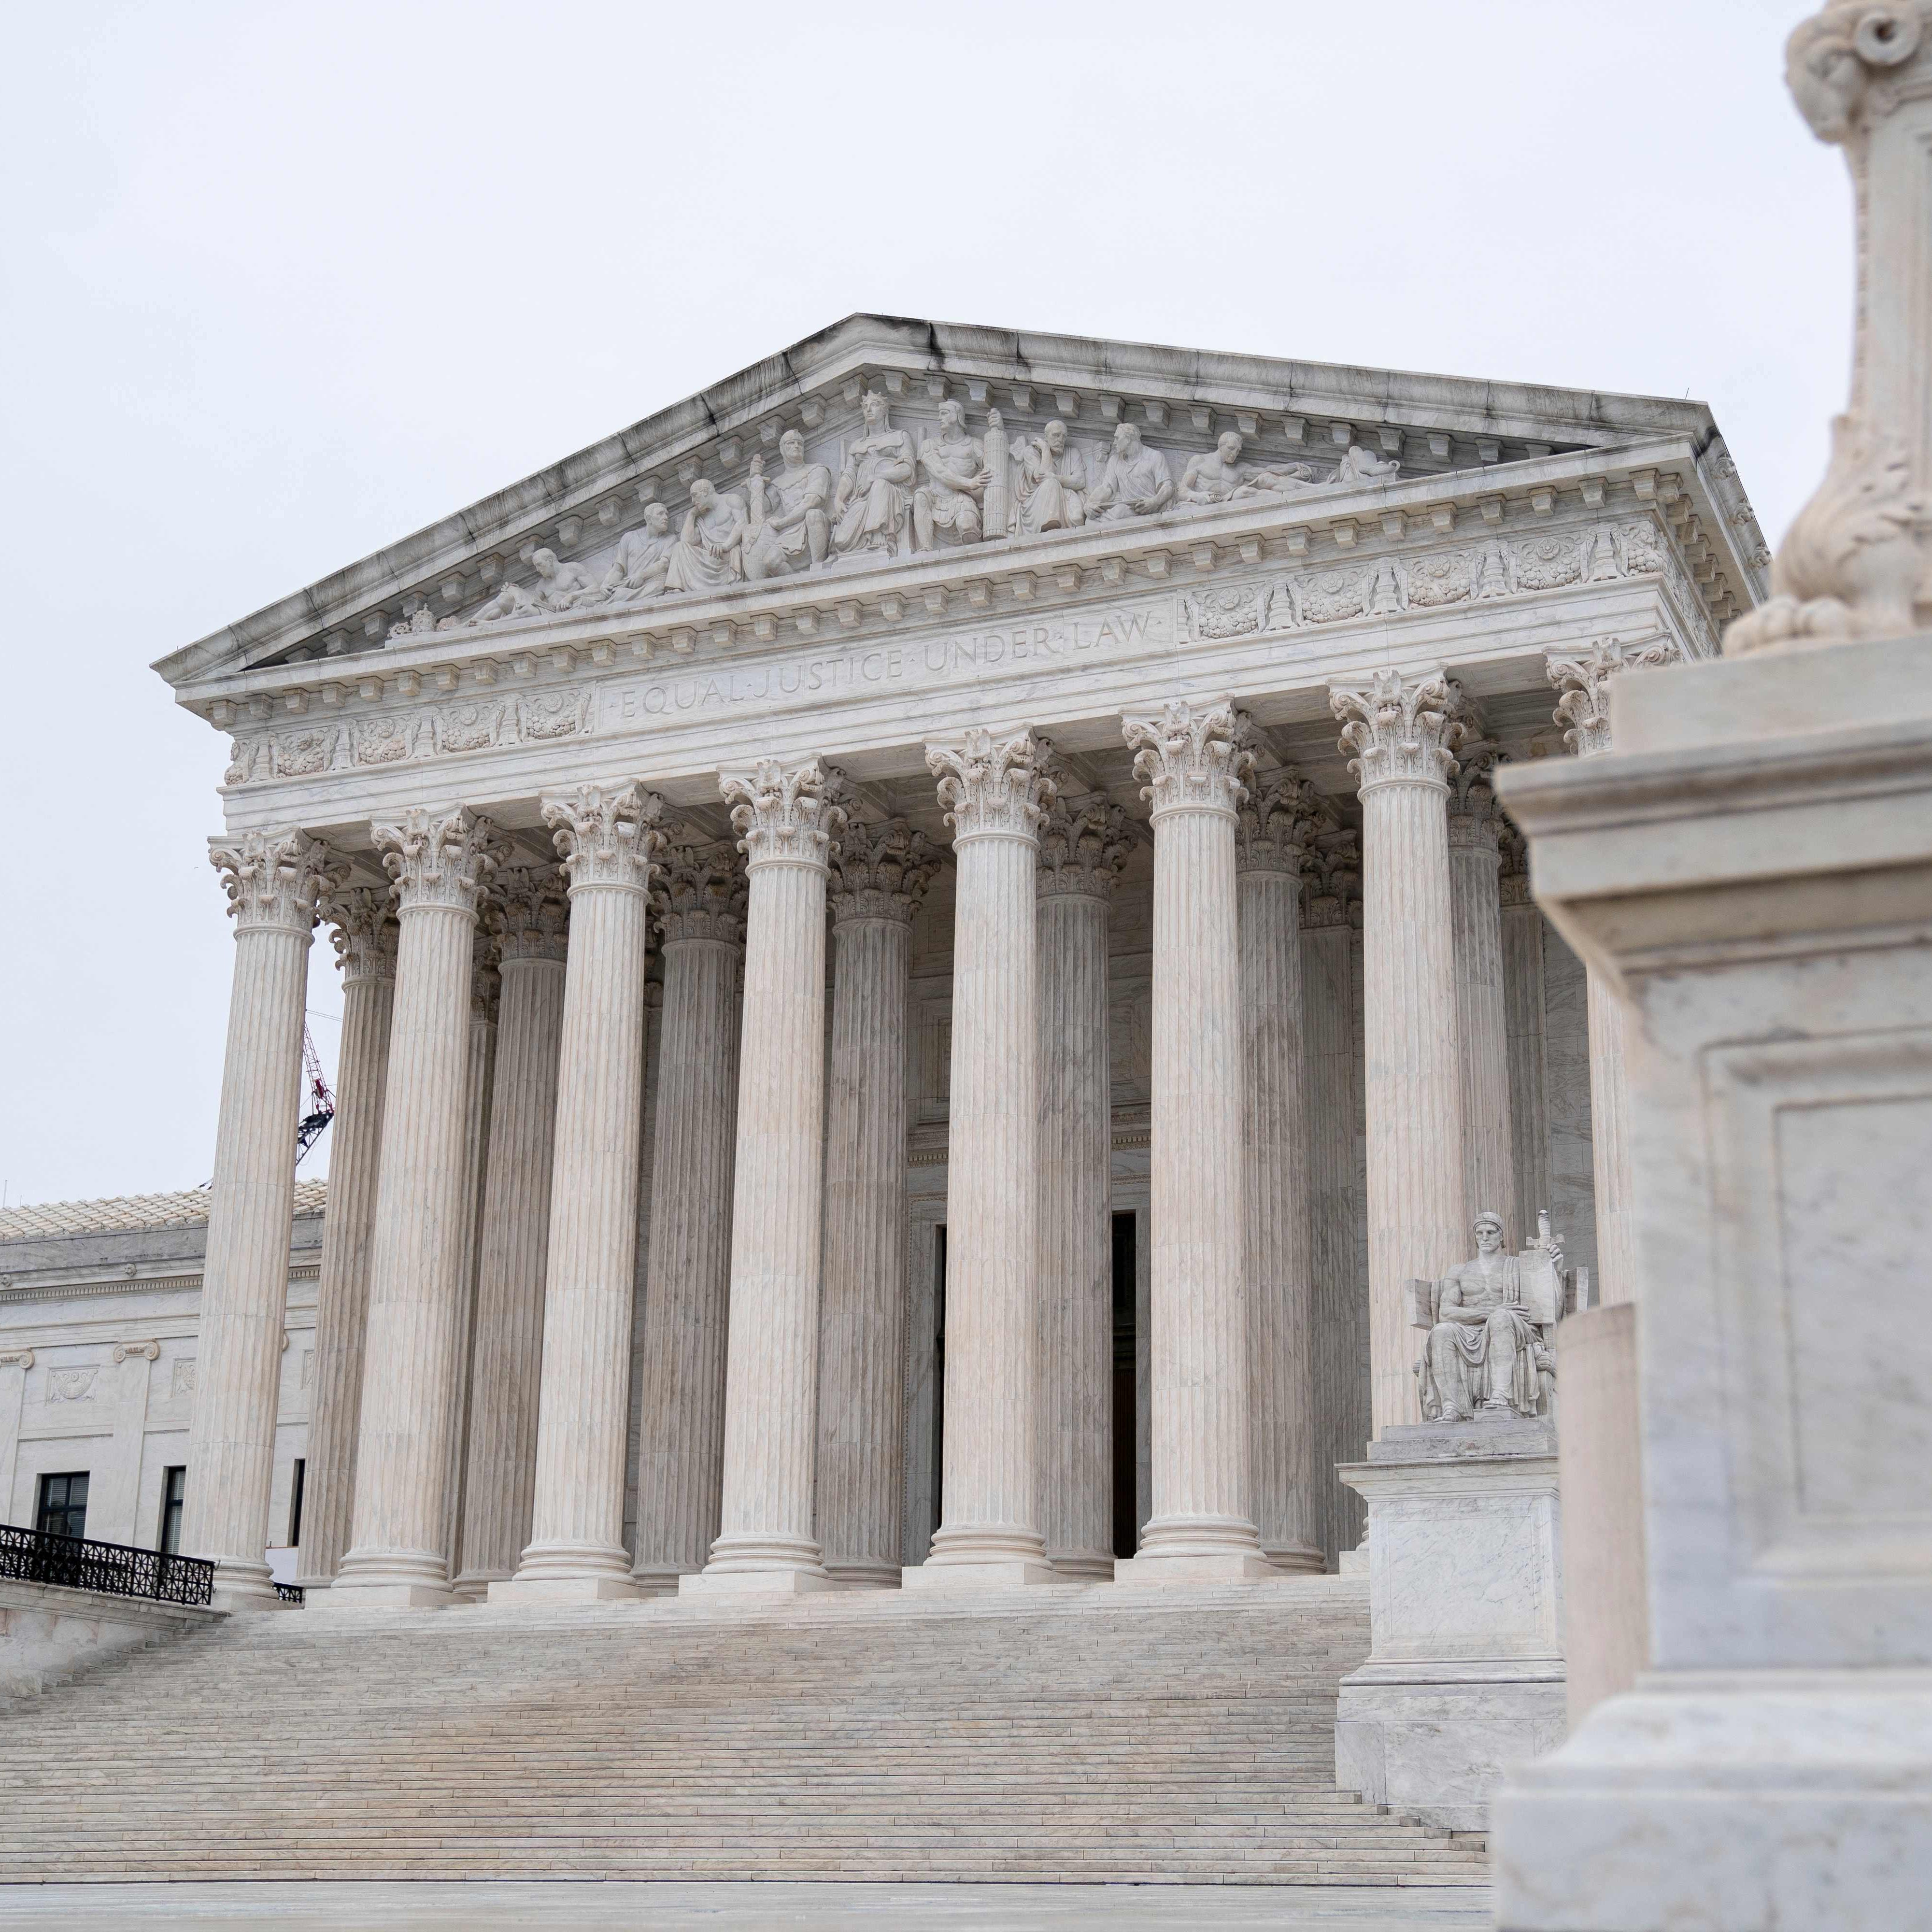 The US Supreme Court is seen in Washington, DC, on January 19, 2023. - The US Supreme Court said Thursday that an eight-month investigation that questioned 100 possible suspects had failed to find the source of the stunning leak last year of its draft abortion ruling. (Photo by Stefani Reynolds / AFP) (Photo by STEFANI REYNOLDS/AFP via Getty Images) ORIG FILE ID: AFP_337F6FJ.jpg